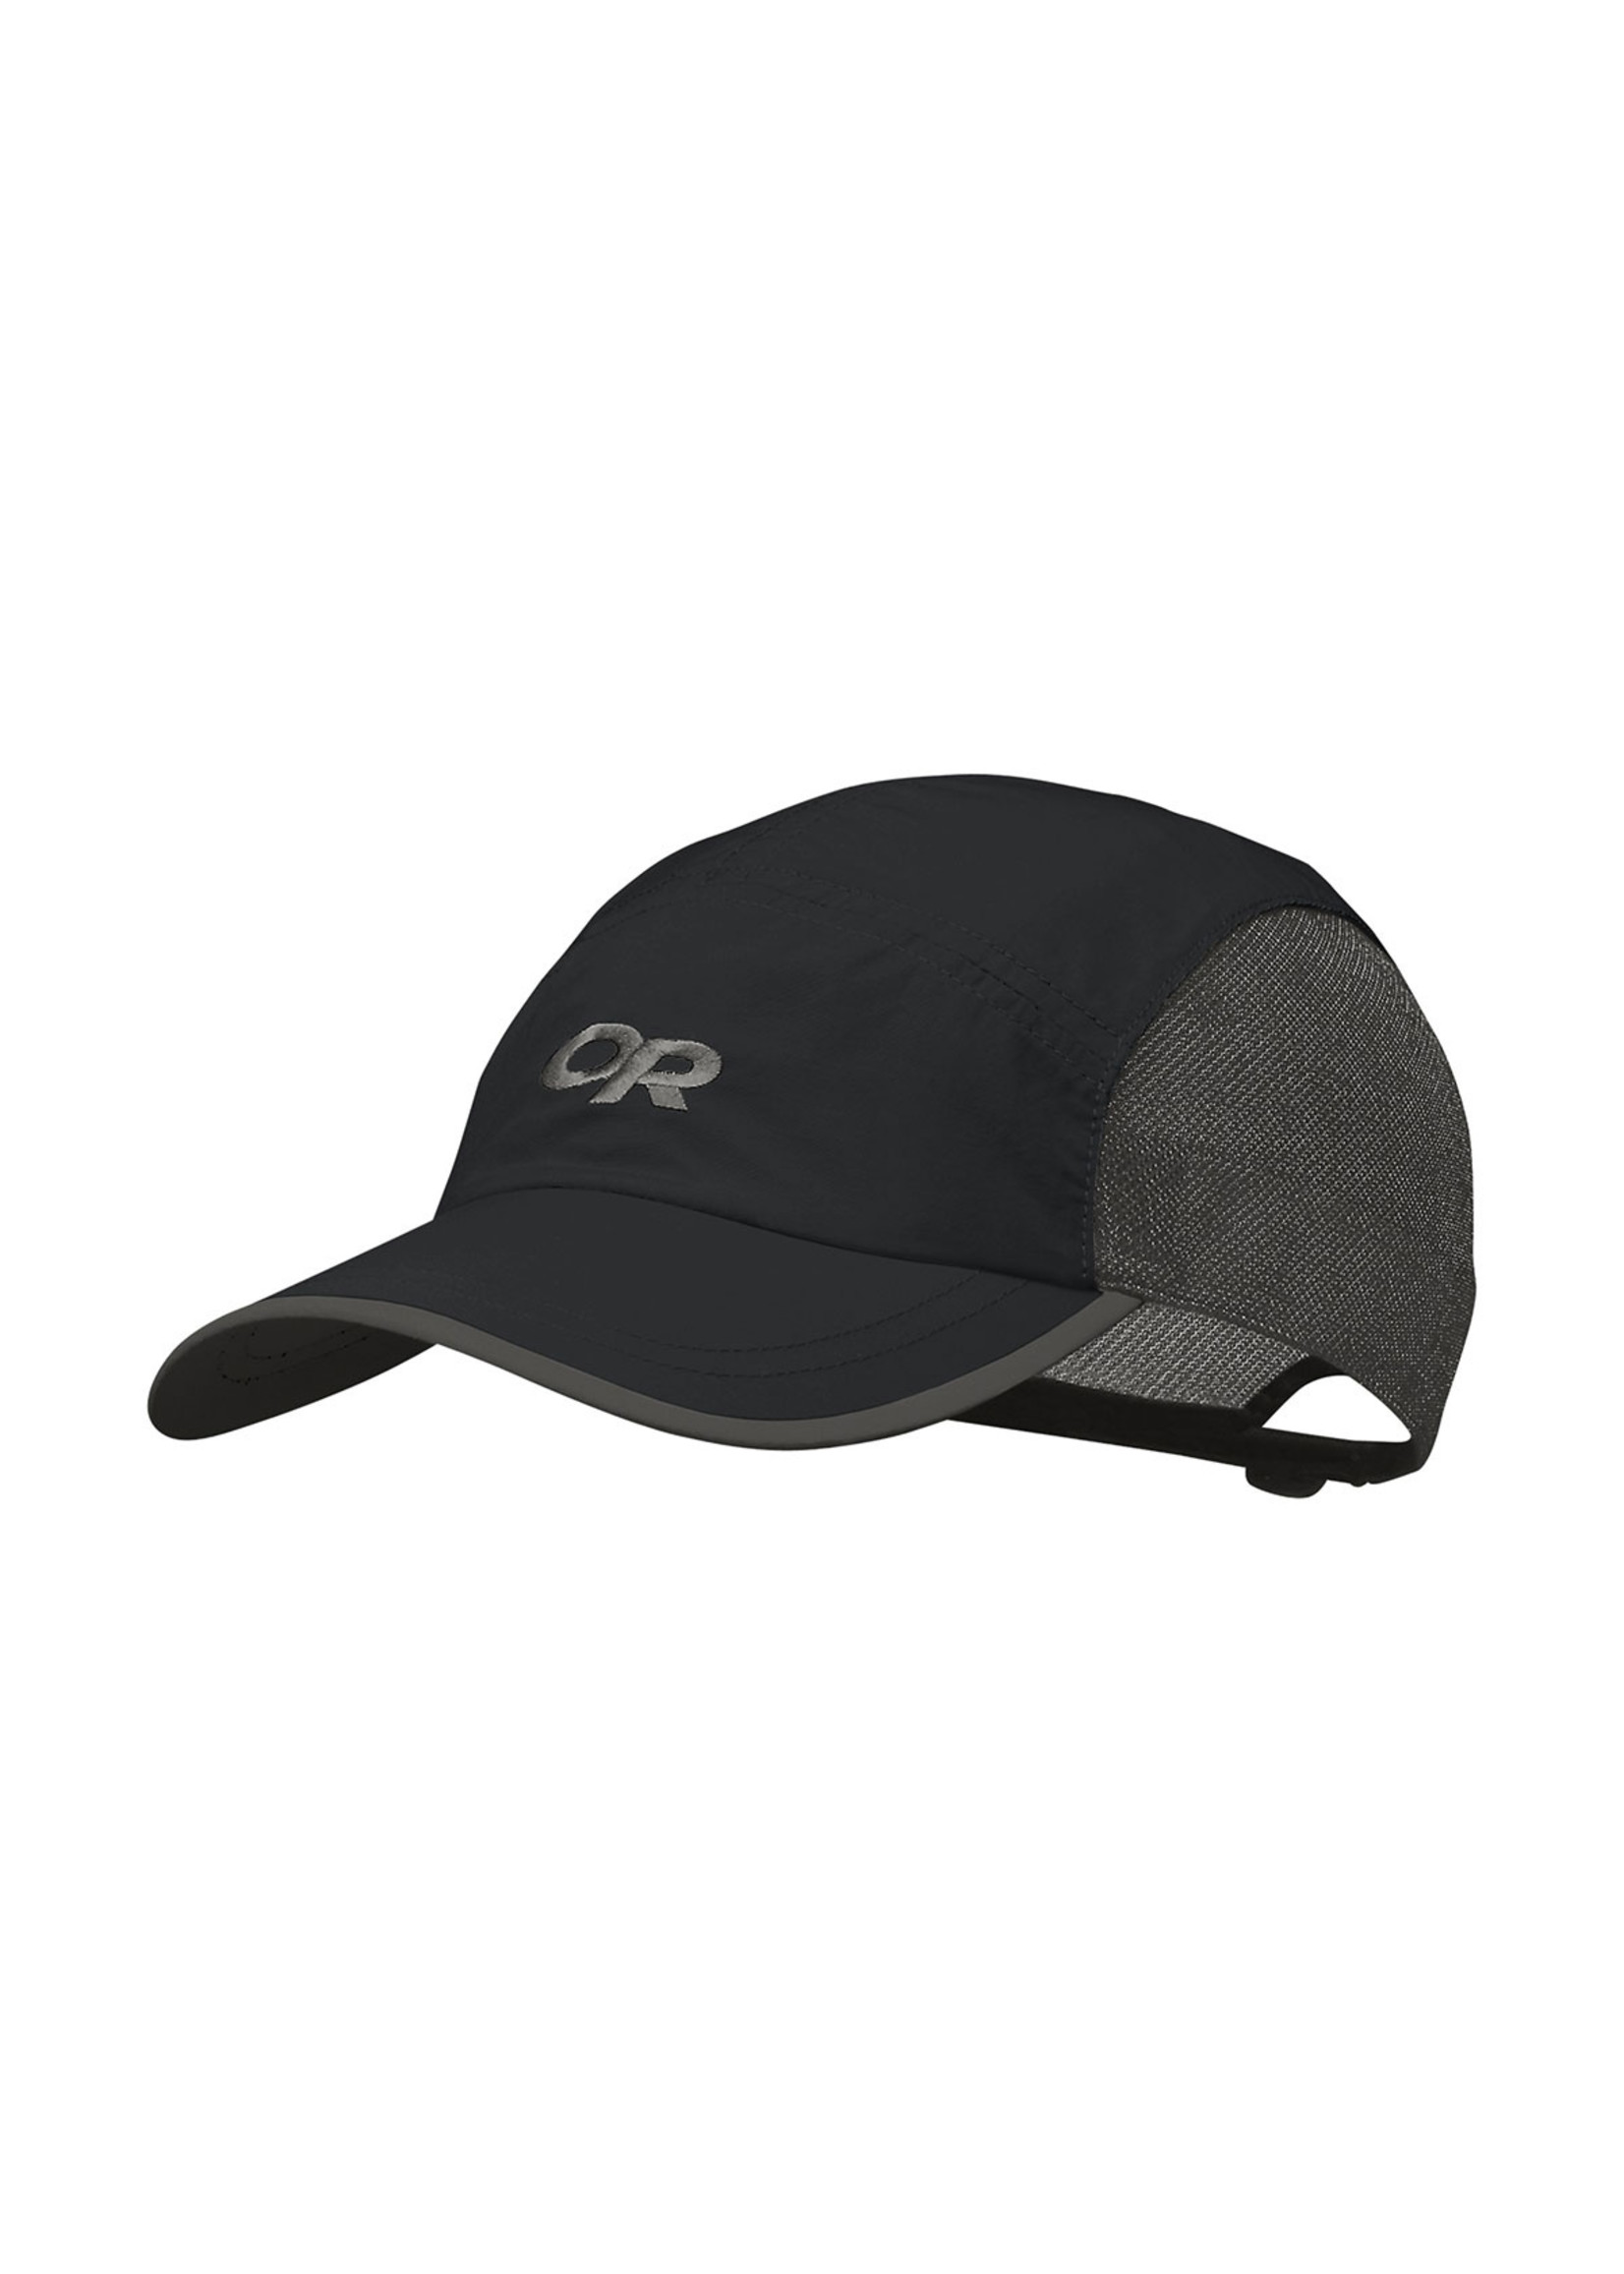 OUTDOOR RESEARCH Casquette Swift avec protection solaire-Unisexe